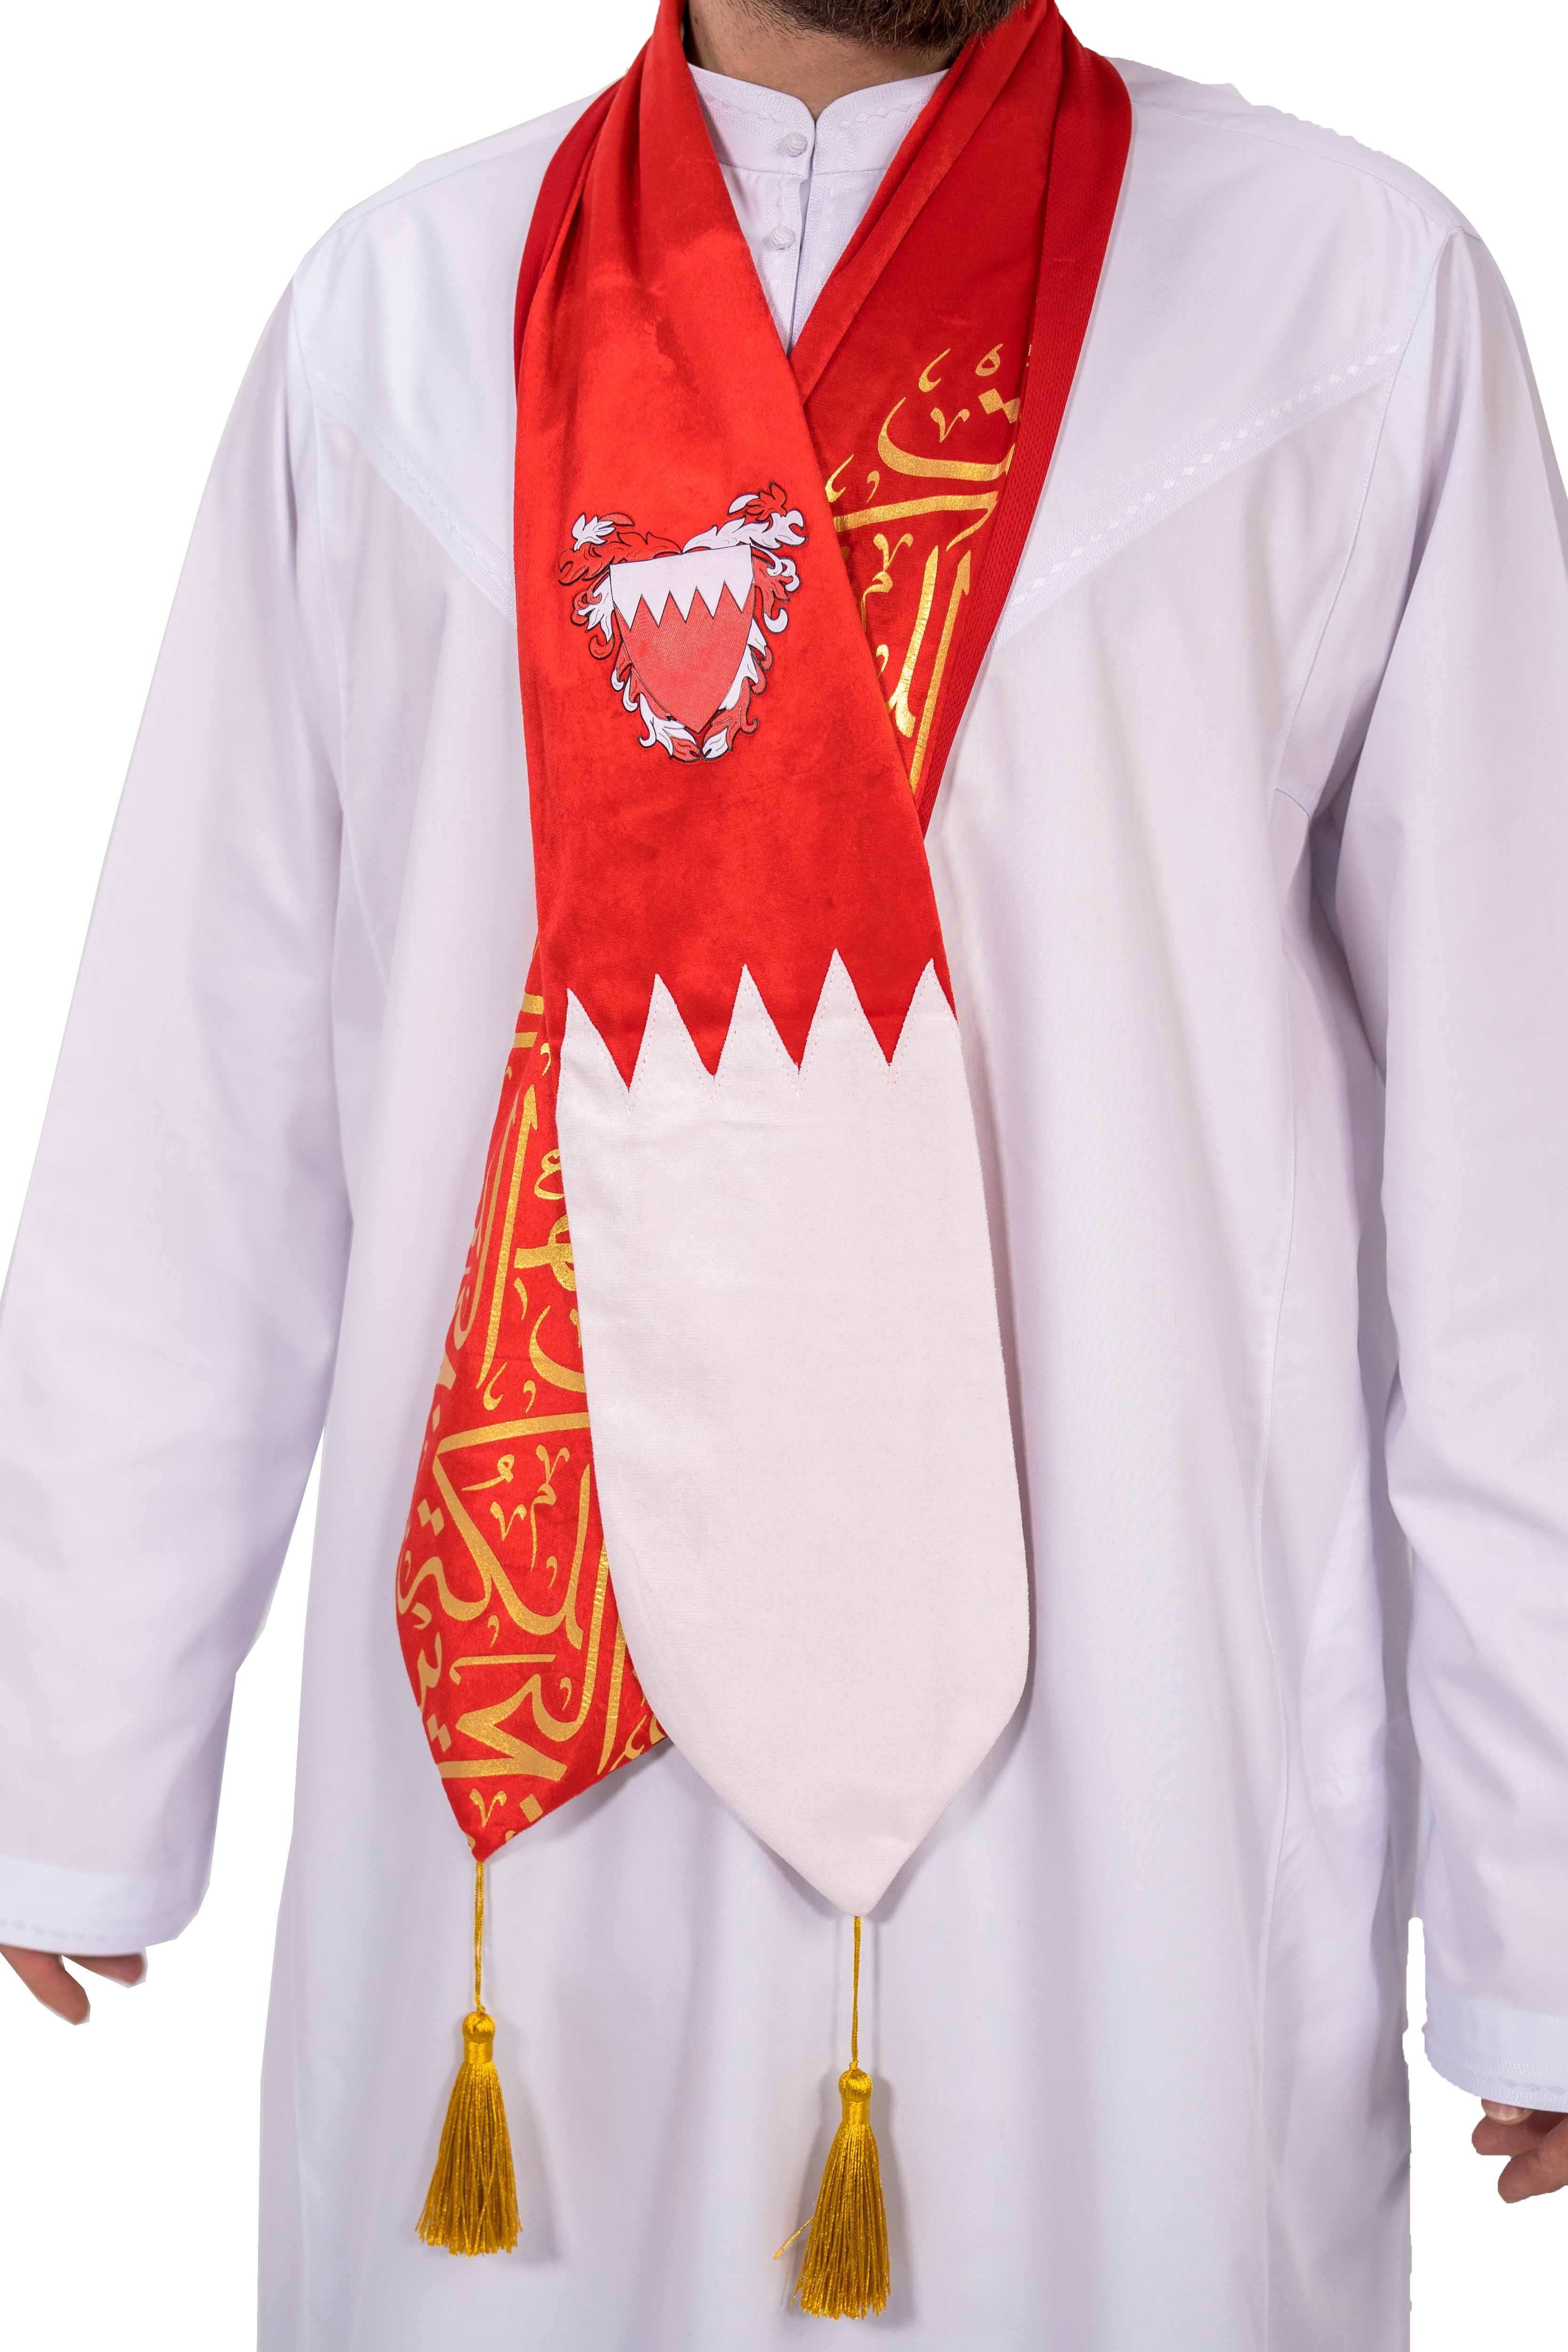 Rovatti Scarf Bahrain National Day 2021 Red